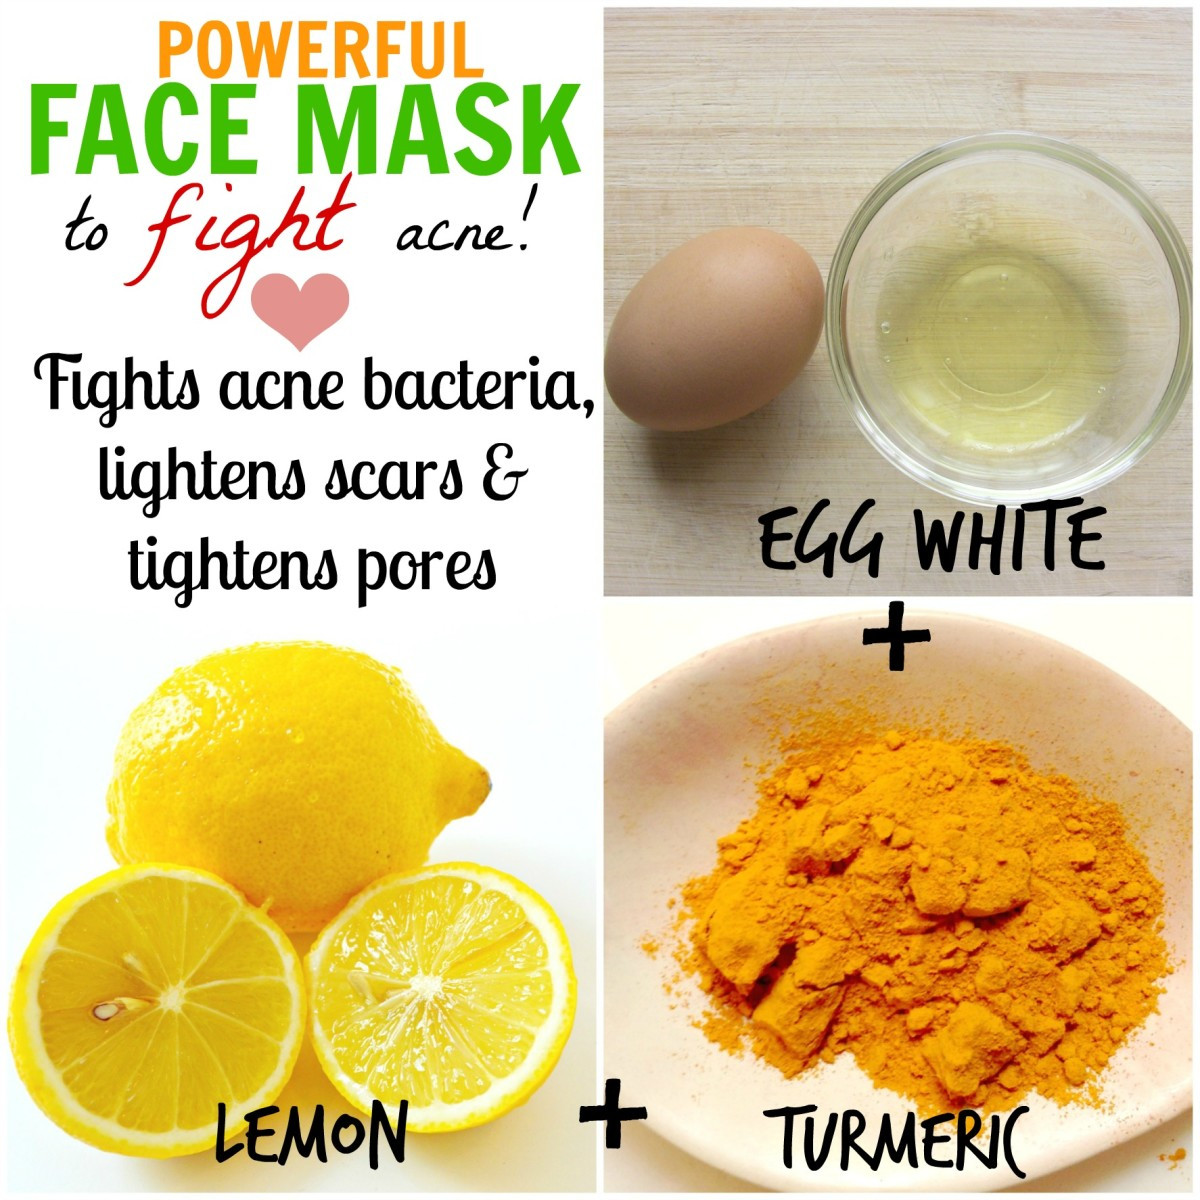 DIY Facial Mask For Acne Scars
 DIY Homemade Face Masks for Acne How to Stop Pimples